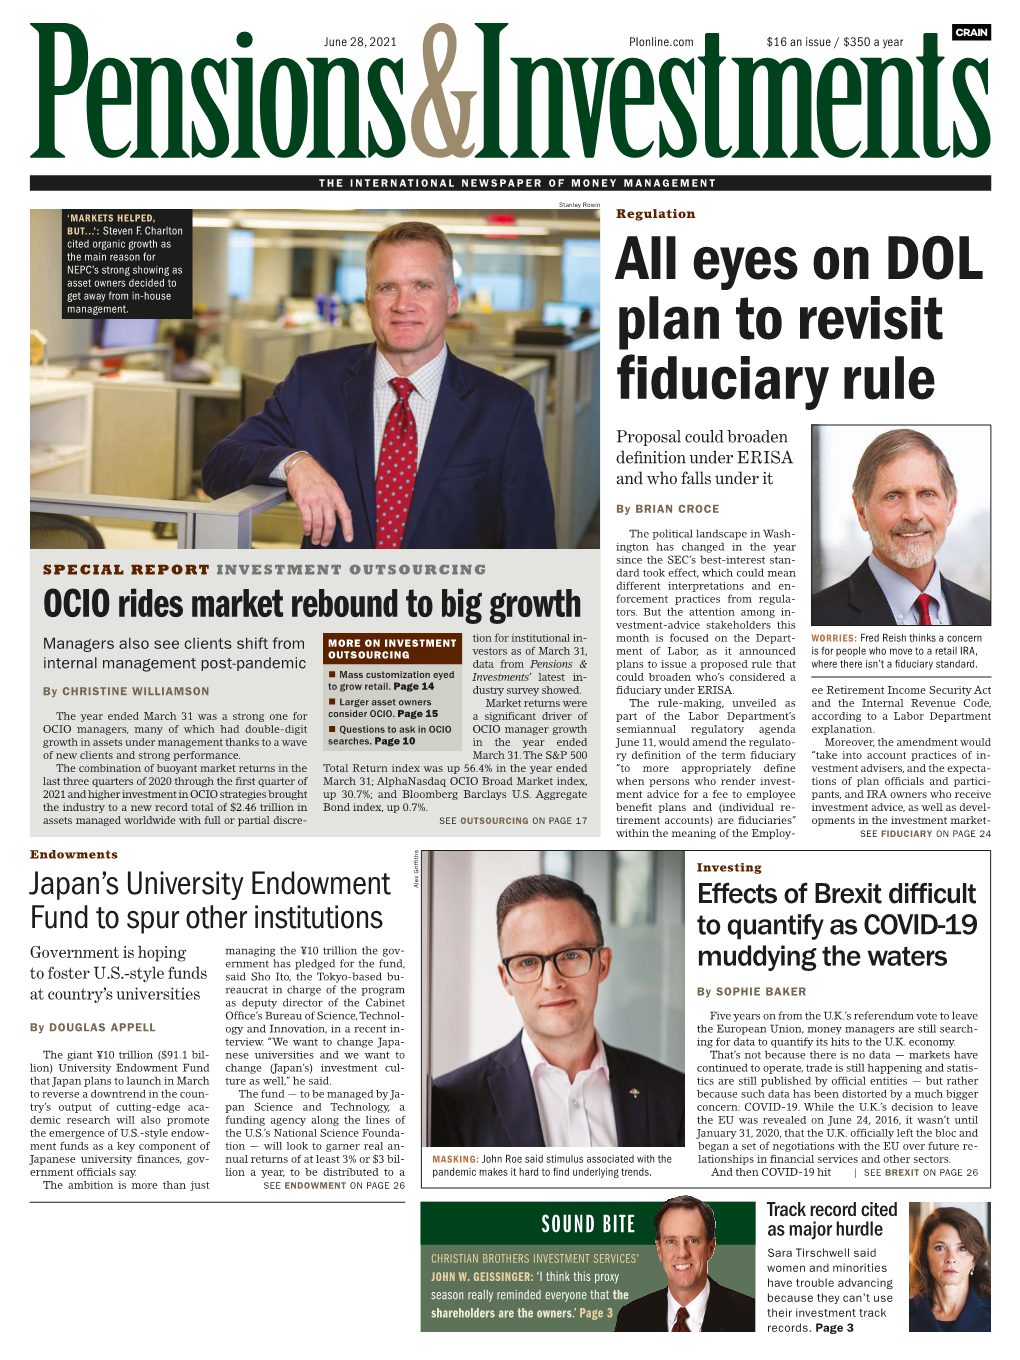 All Eyes on DOL Plan to Revisit Fiduciary Rule